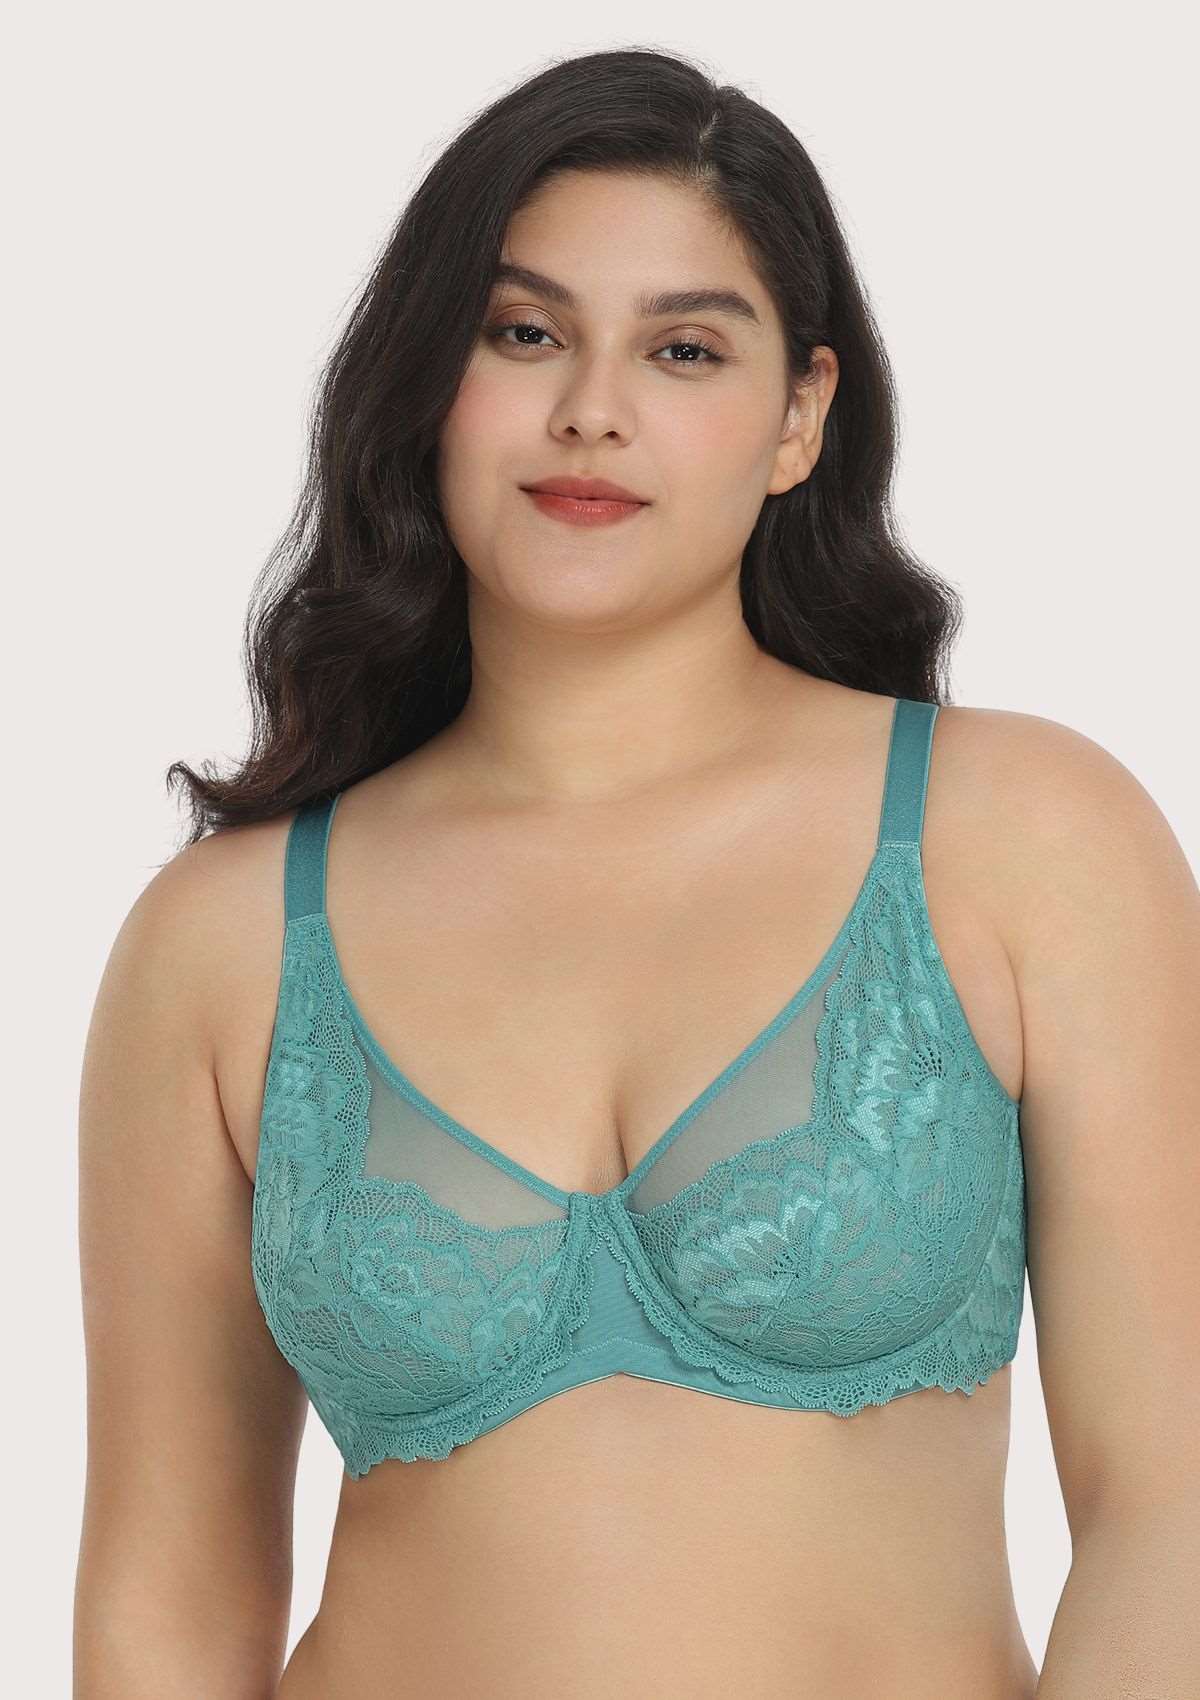 HSIA Paeonia Lace Full Coverage Underwire Non-Padded Uplifting Bra - Dark Blue / 38 / D